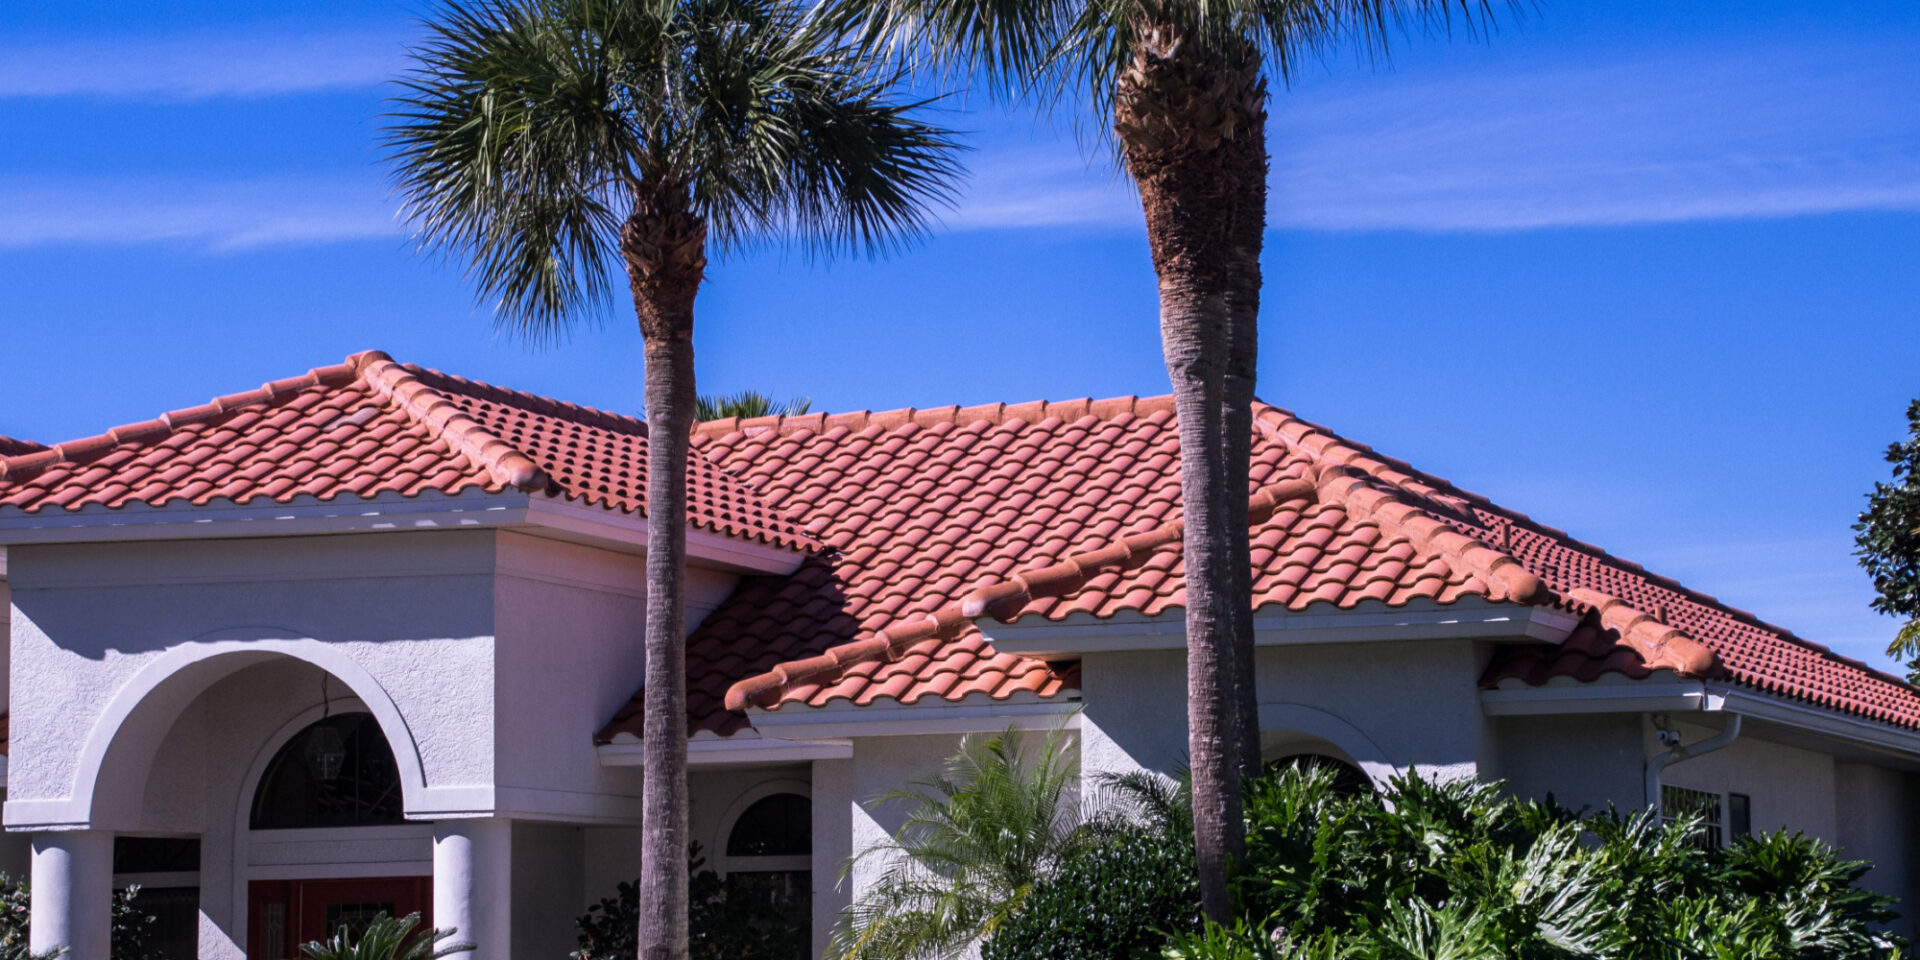 Spanish Tile Roofs